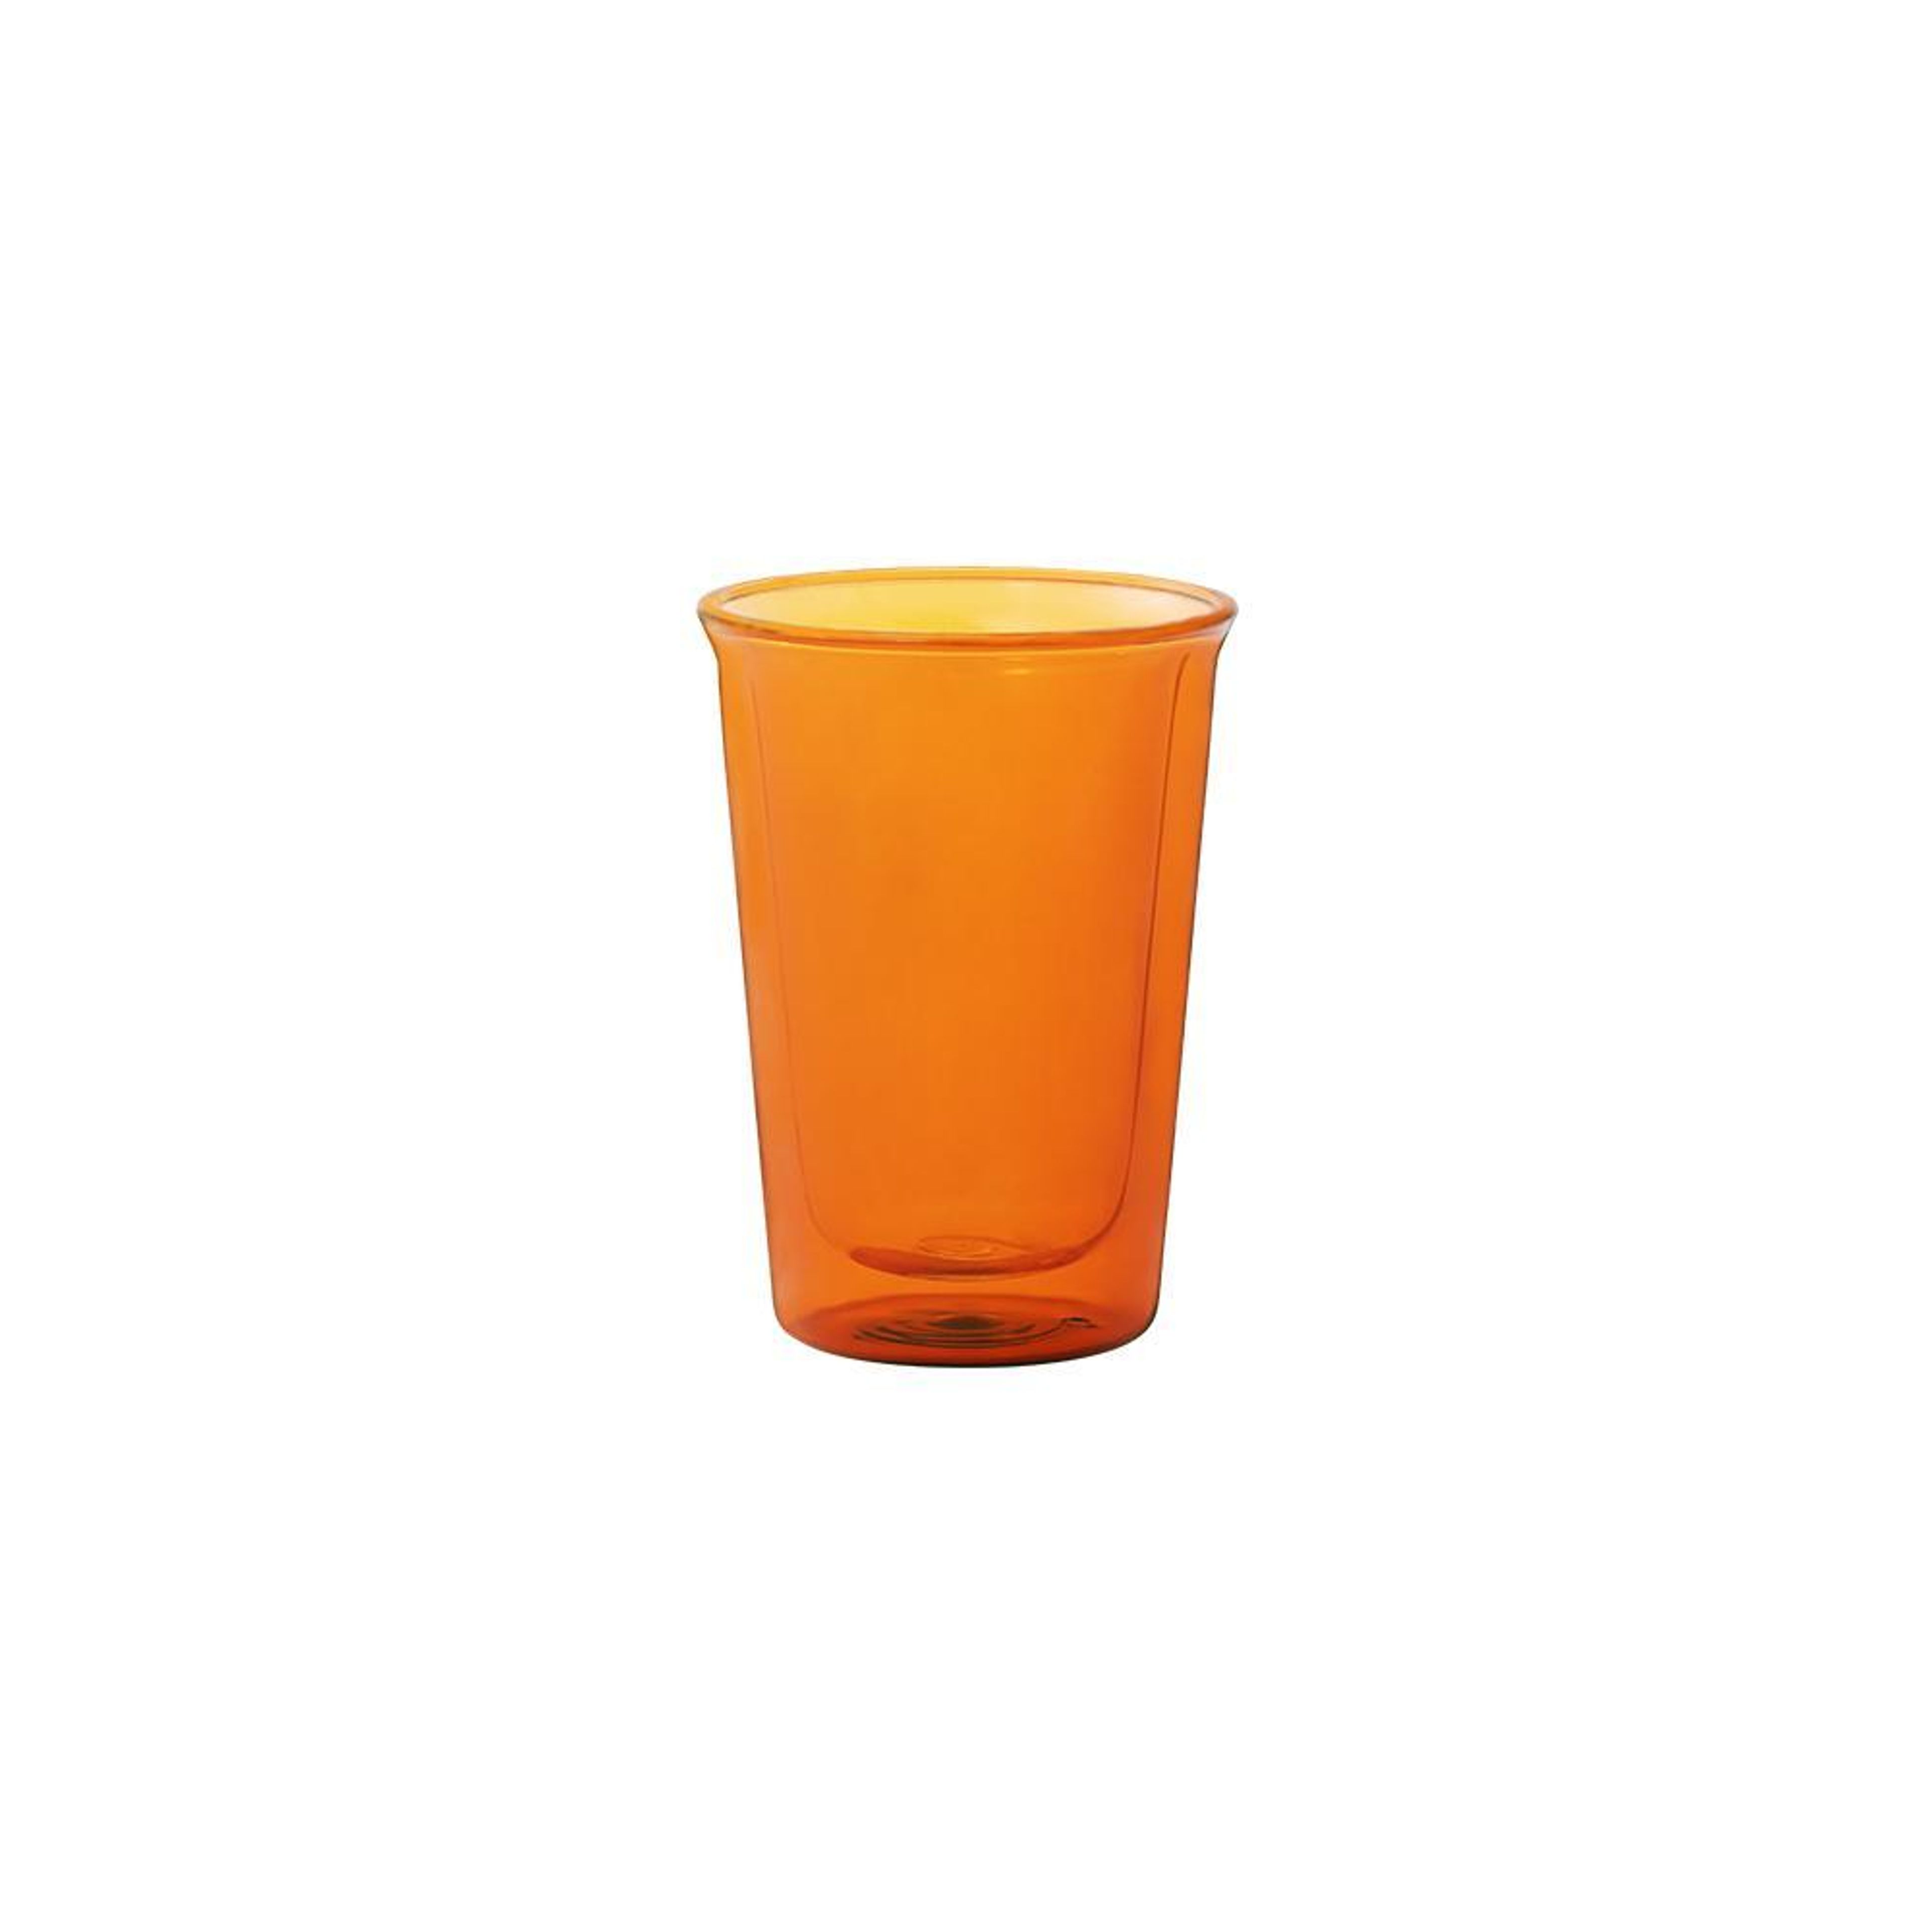 CAST AMBER double wall glass 290ml